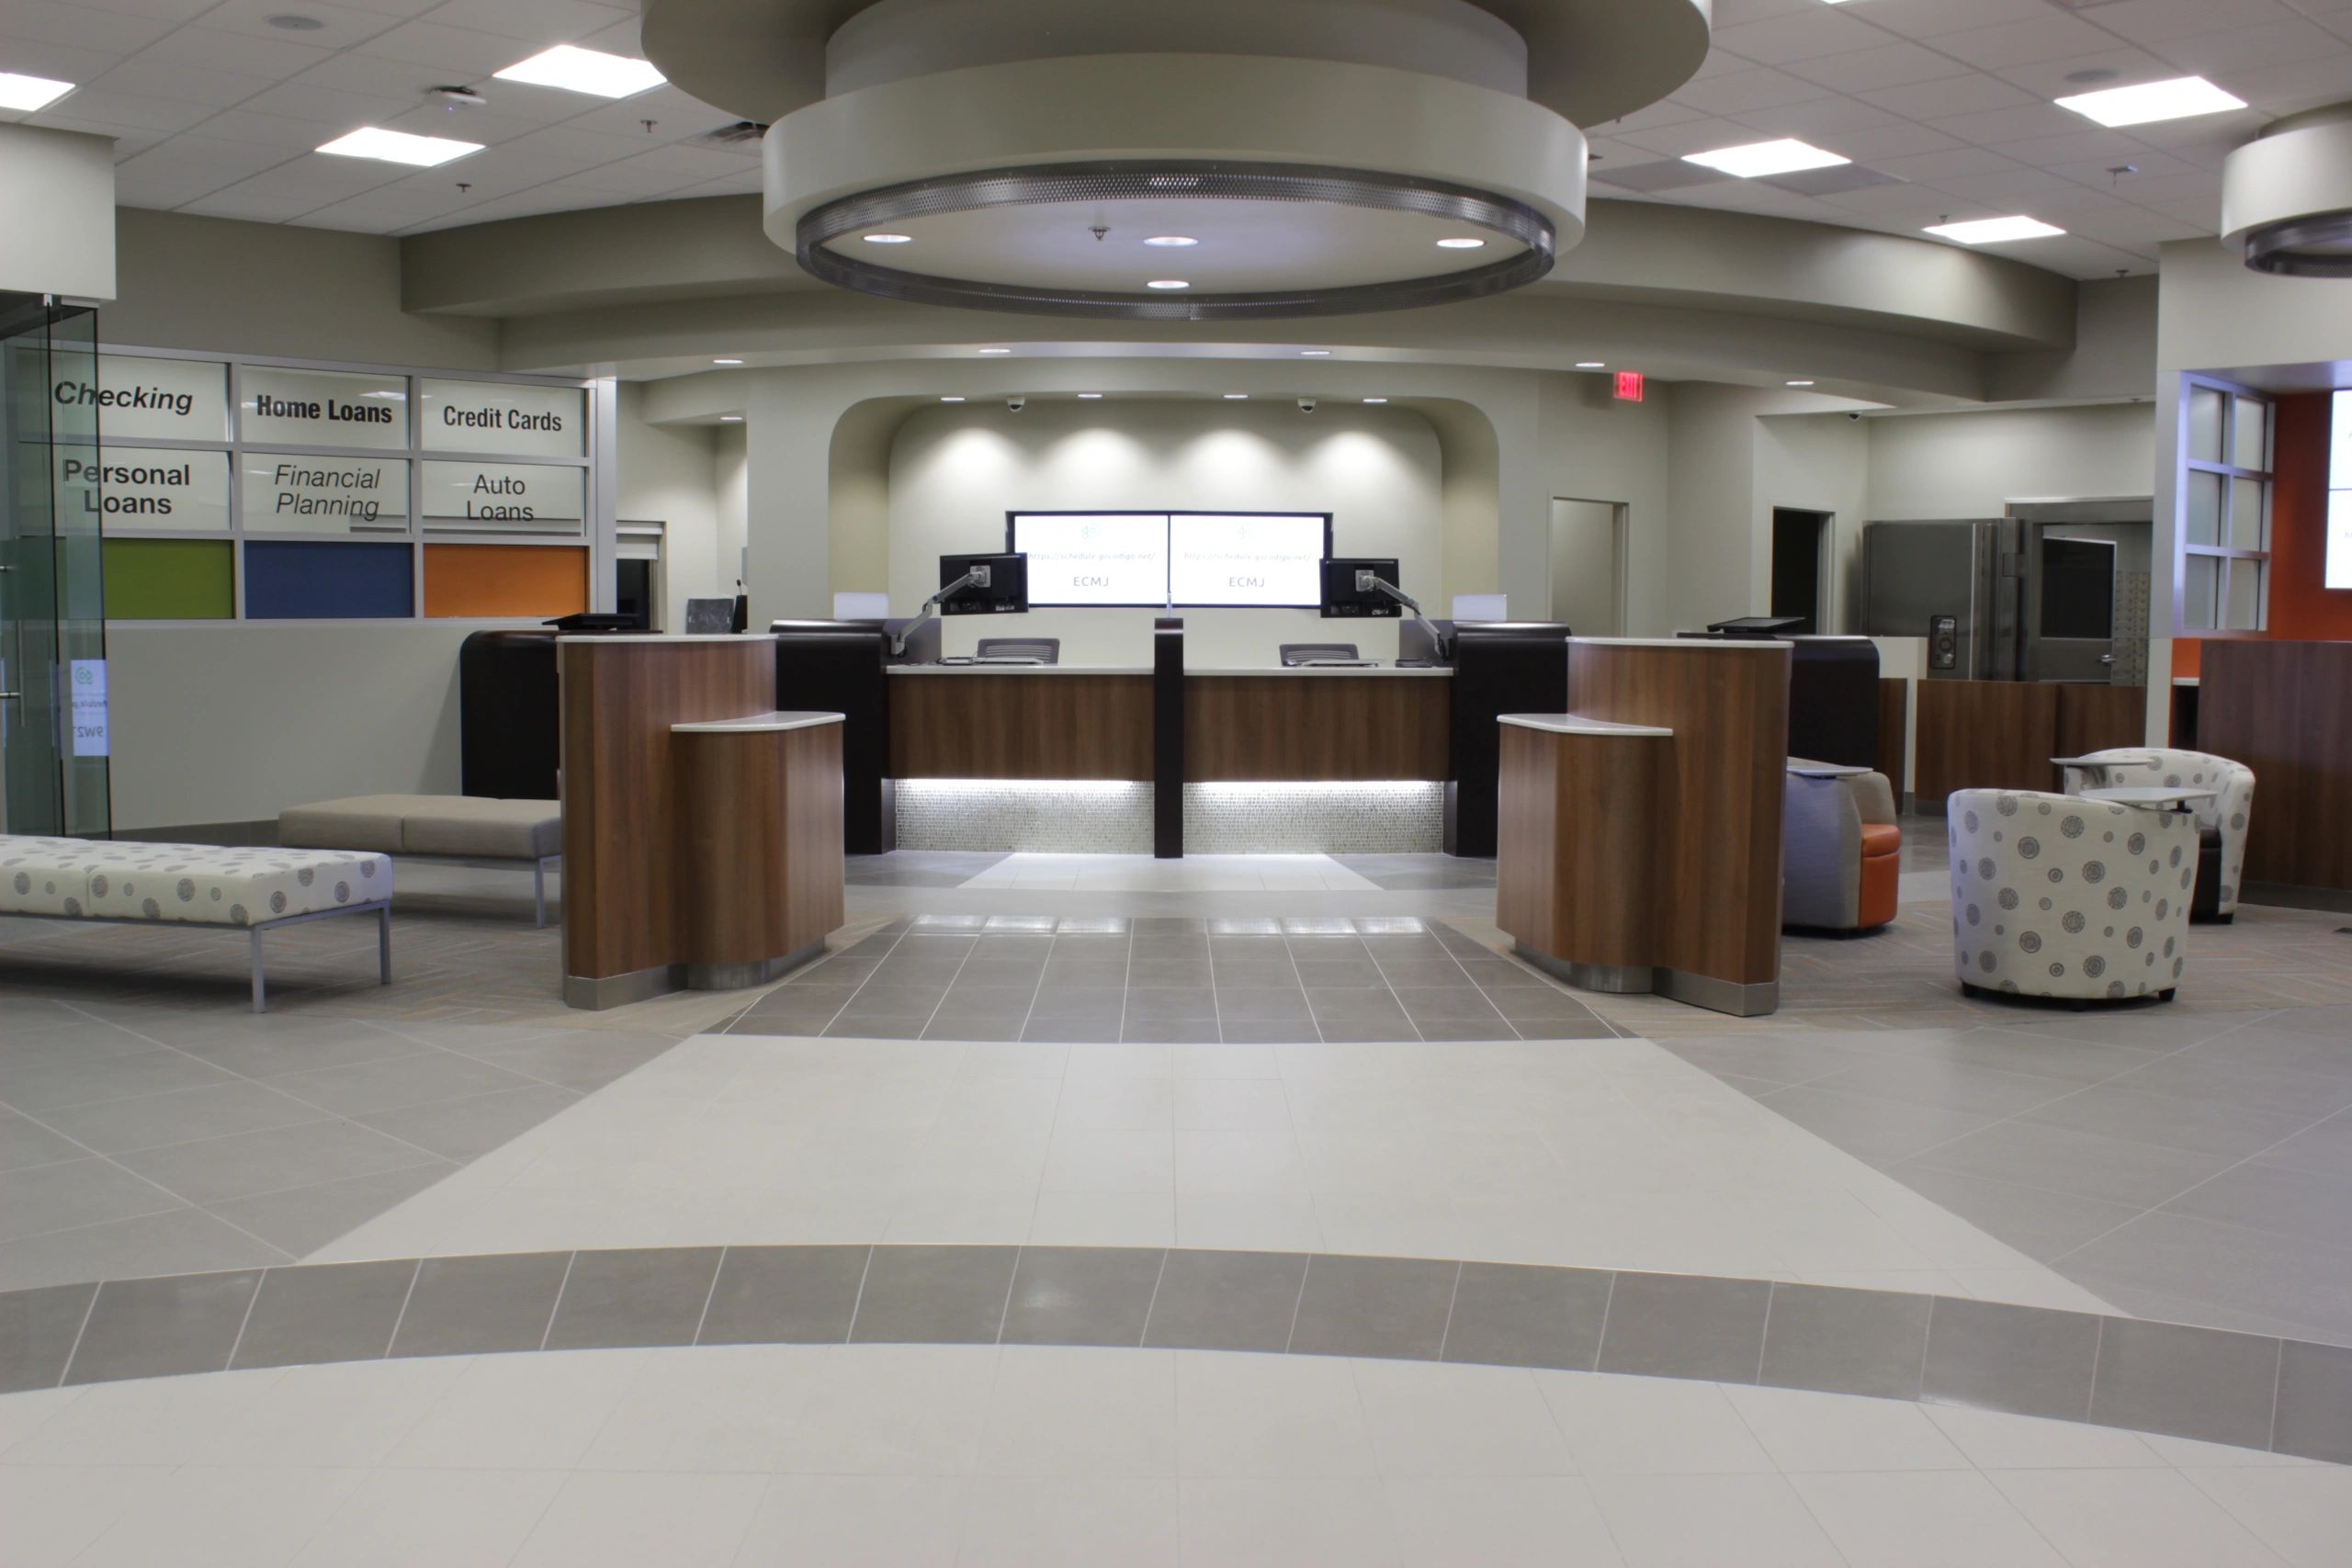 Commercial Tile Flooring in a bank